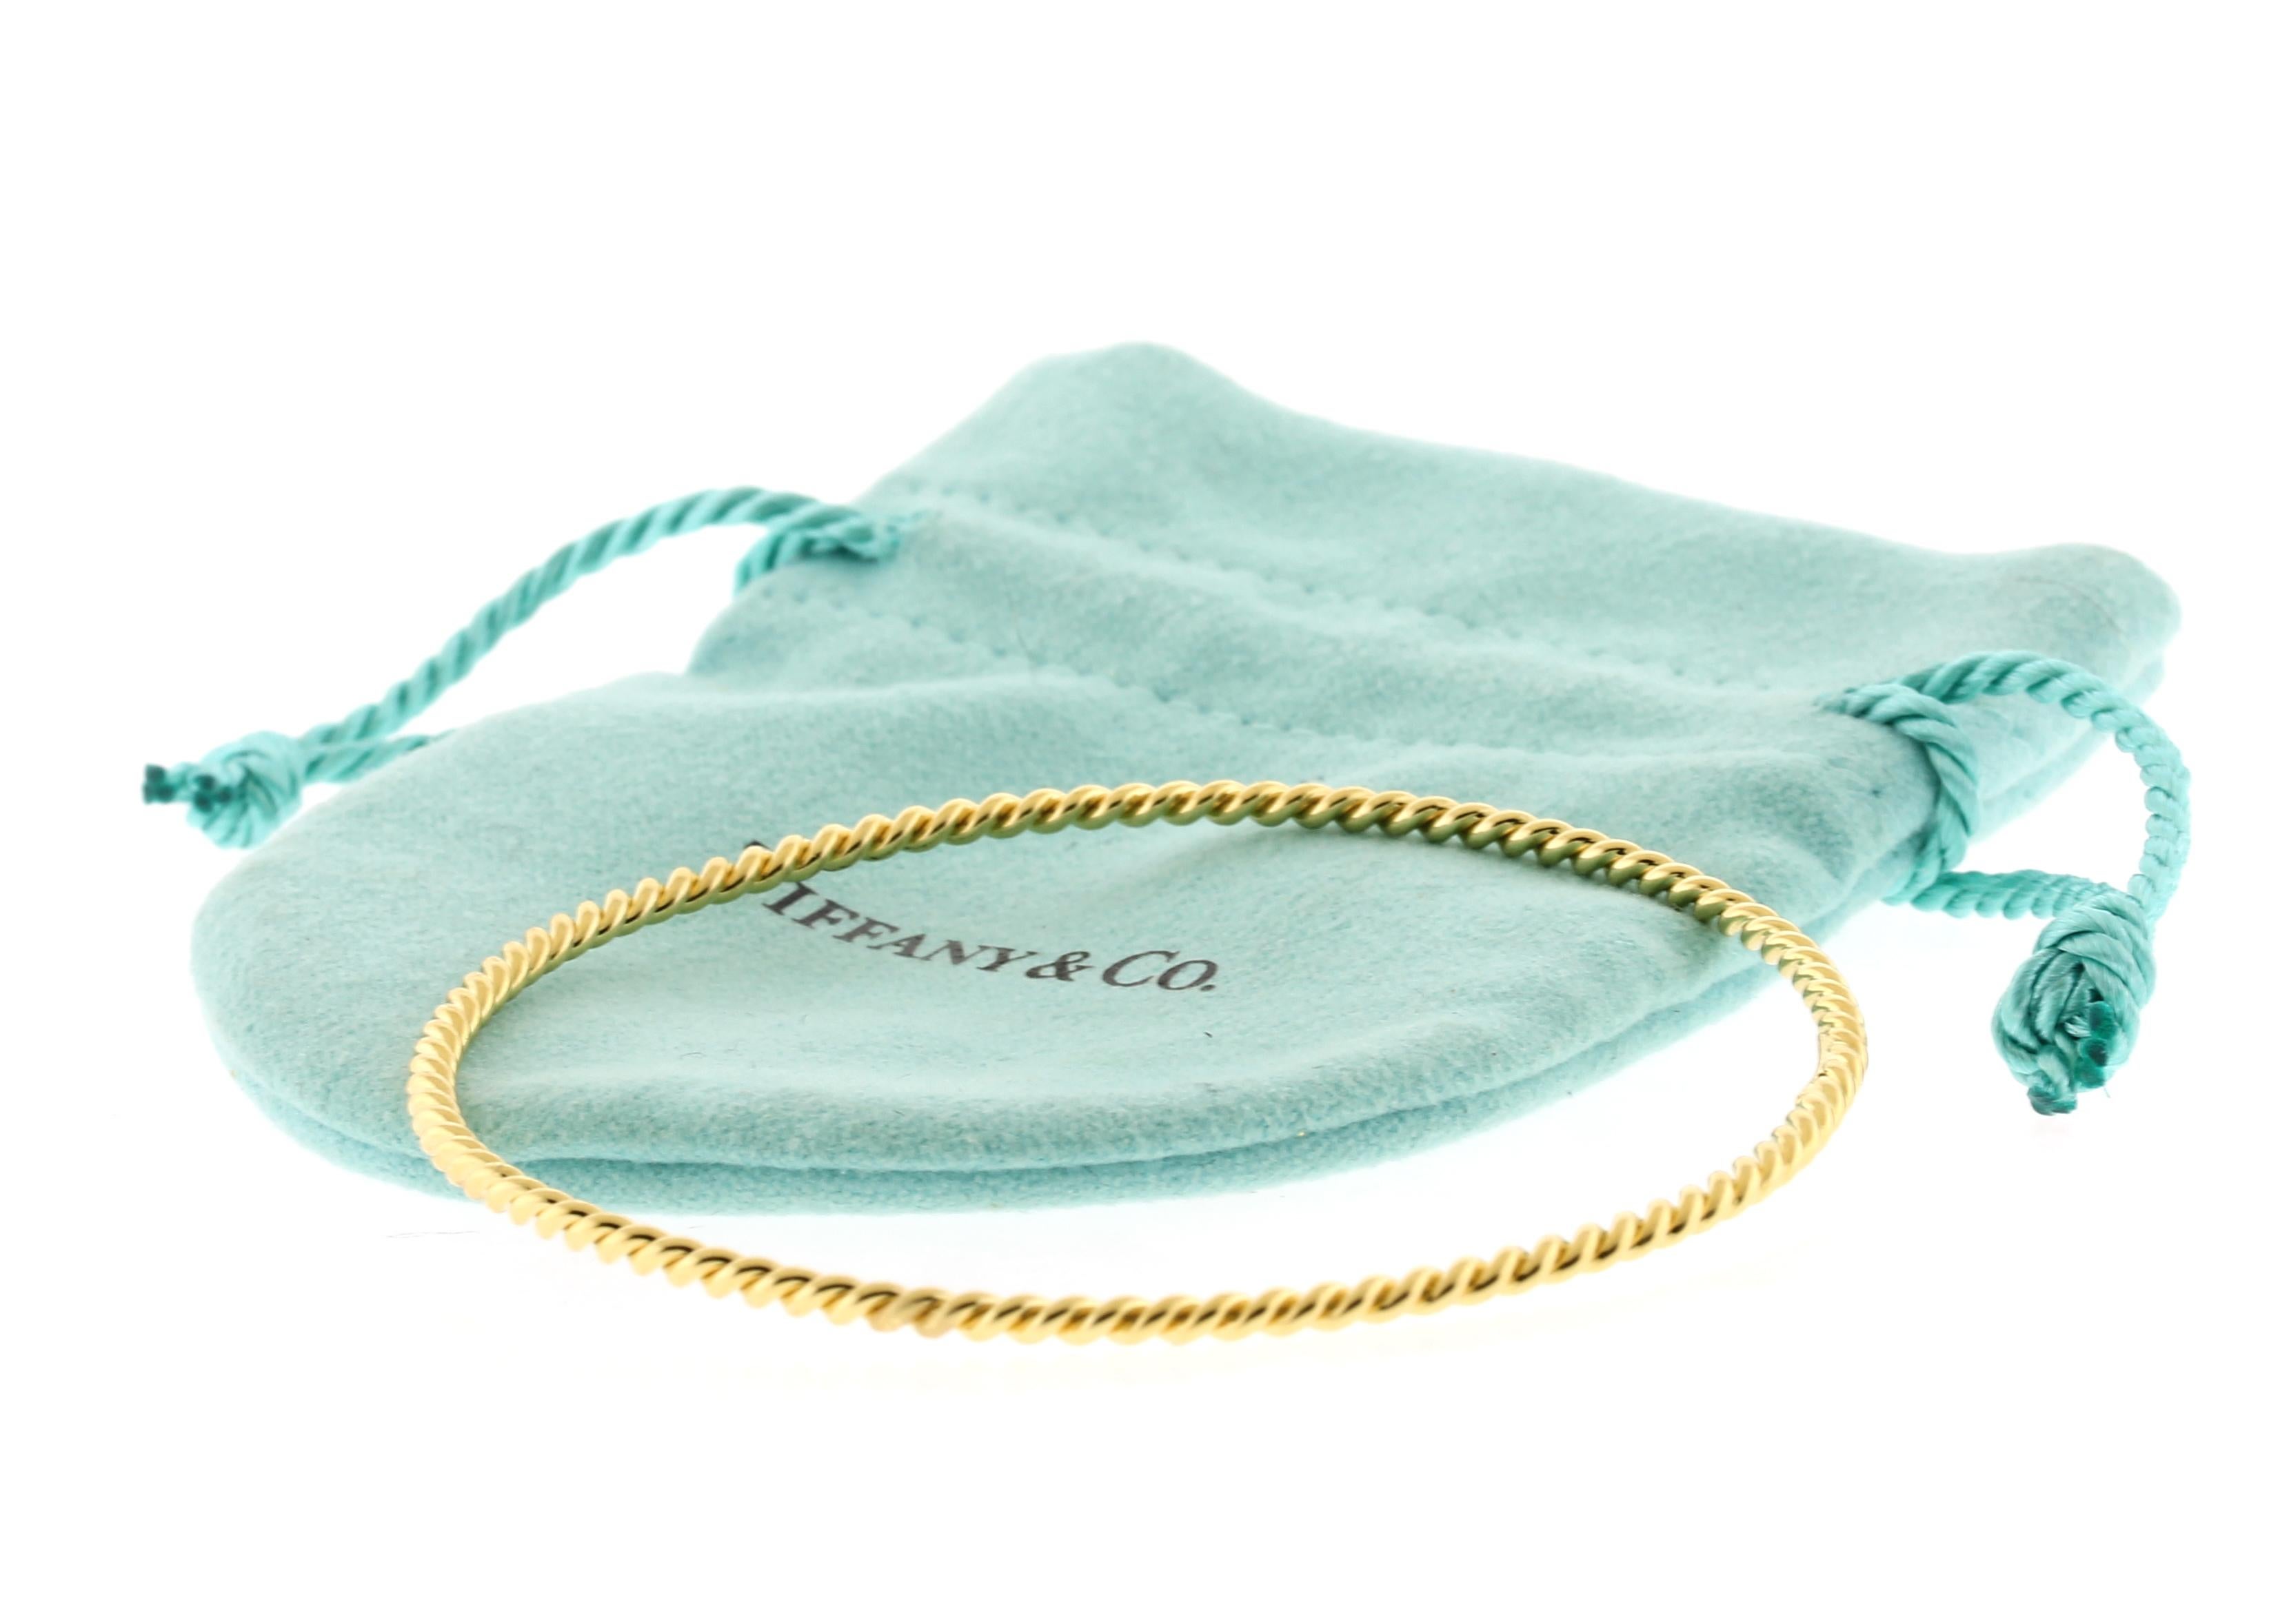 From Tiffany & Co, this twisted bangle is light weight and easy to wear.
• Metal: 18kt Yellow Gold
• Circa: 1990s
• Dimensions: 2 1/2 in Diameter
• Thickness: about 2.2mm
• Weight: 9 grams
• Packaging: Tiffany pouch
• Condition: Excellent Condition